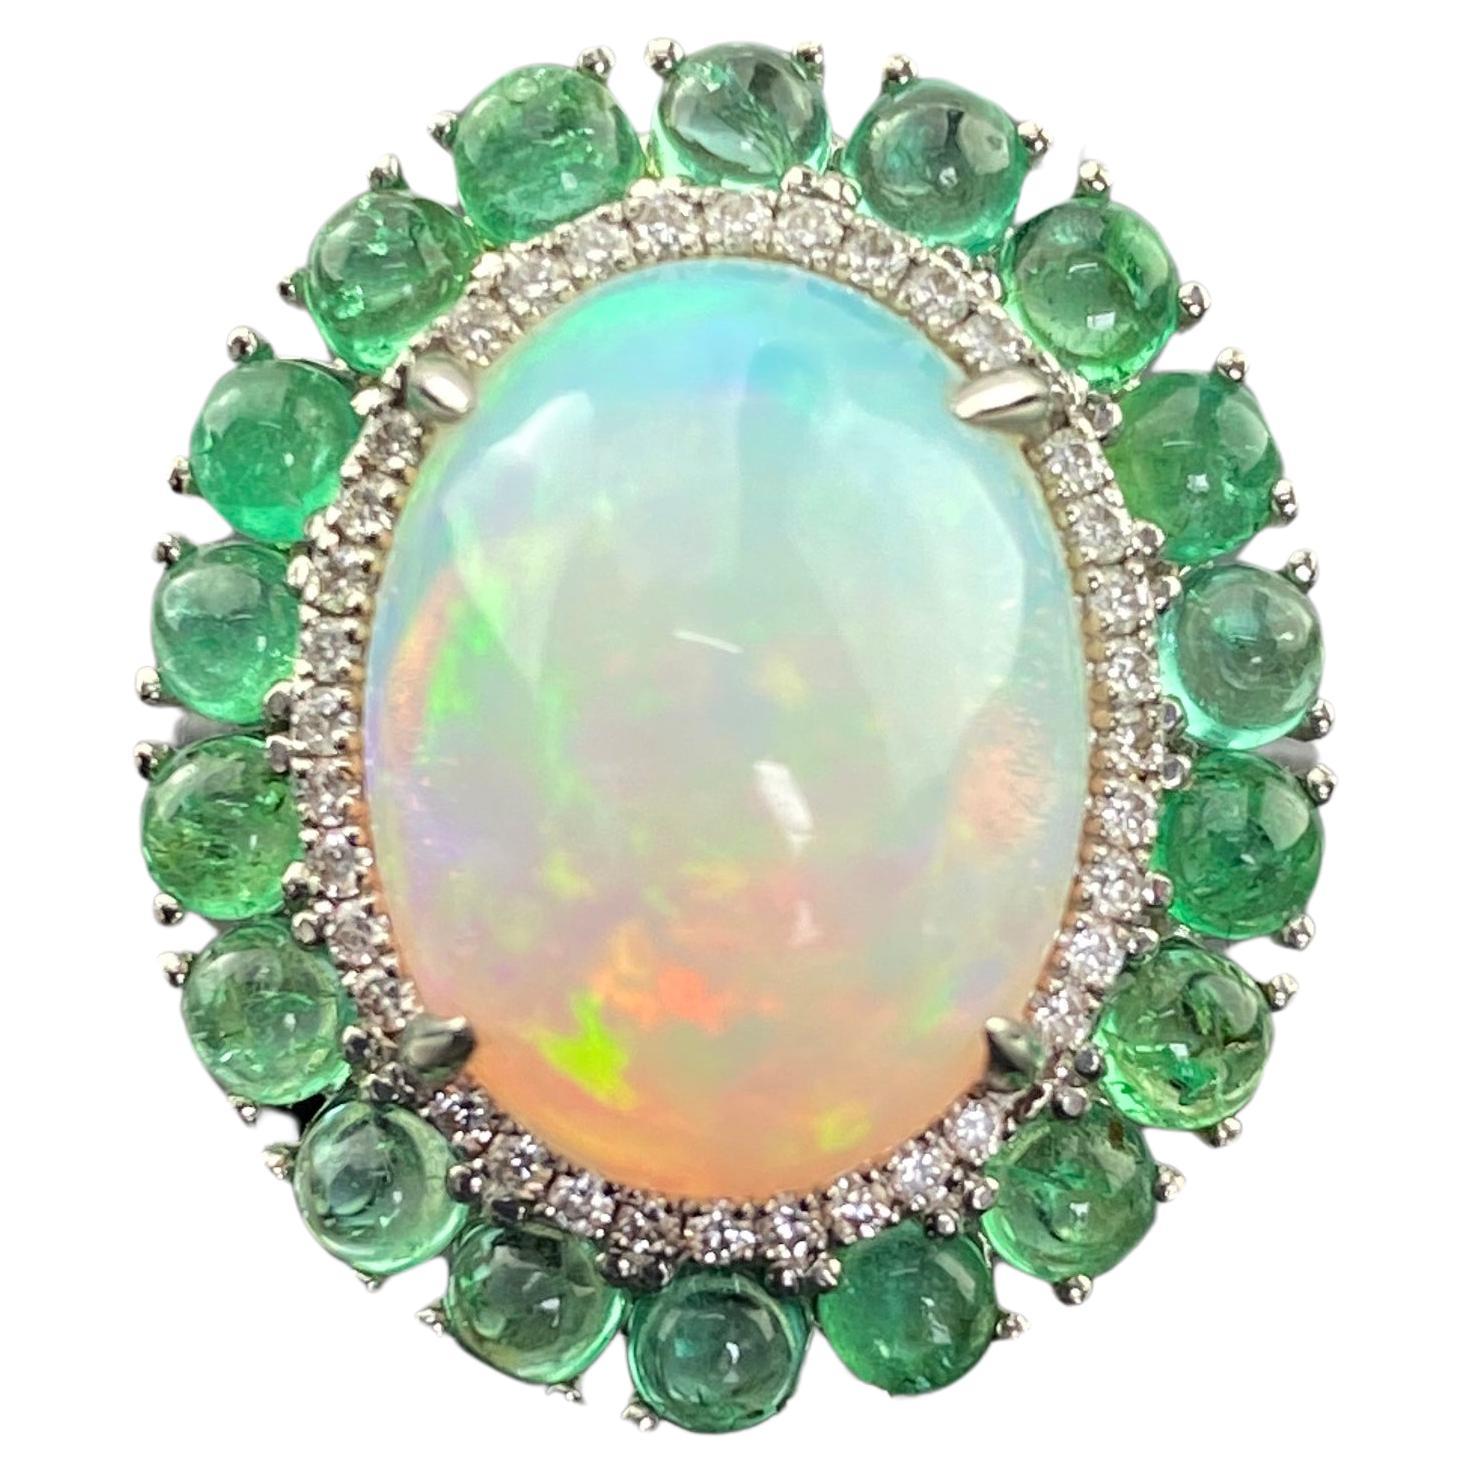 Certified Cabochon Opal and Colombian Emerald Cocktail Dome Ring